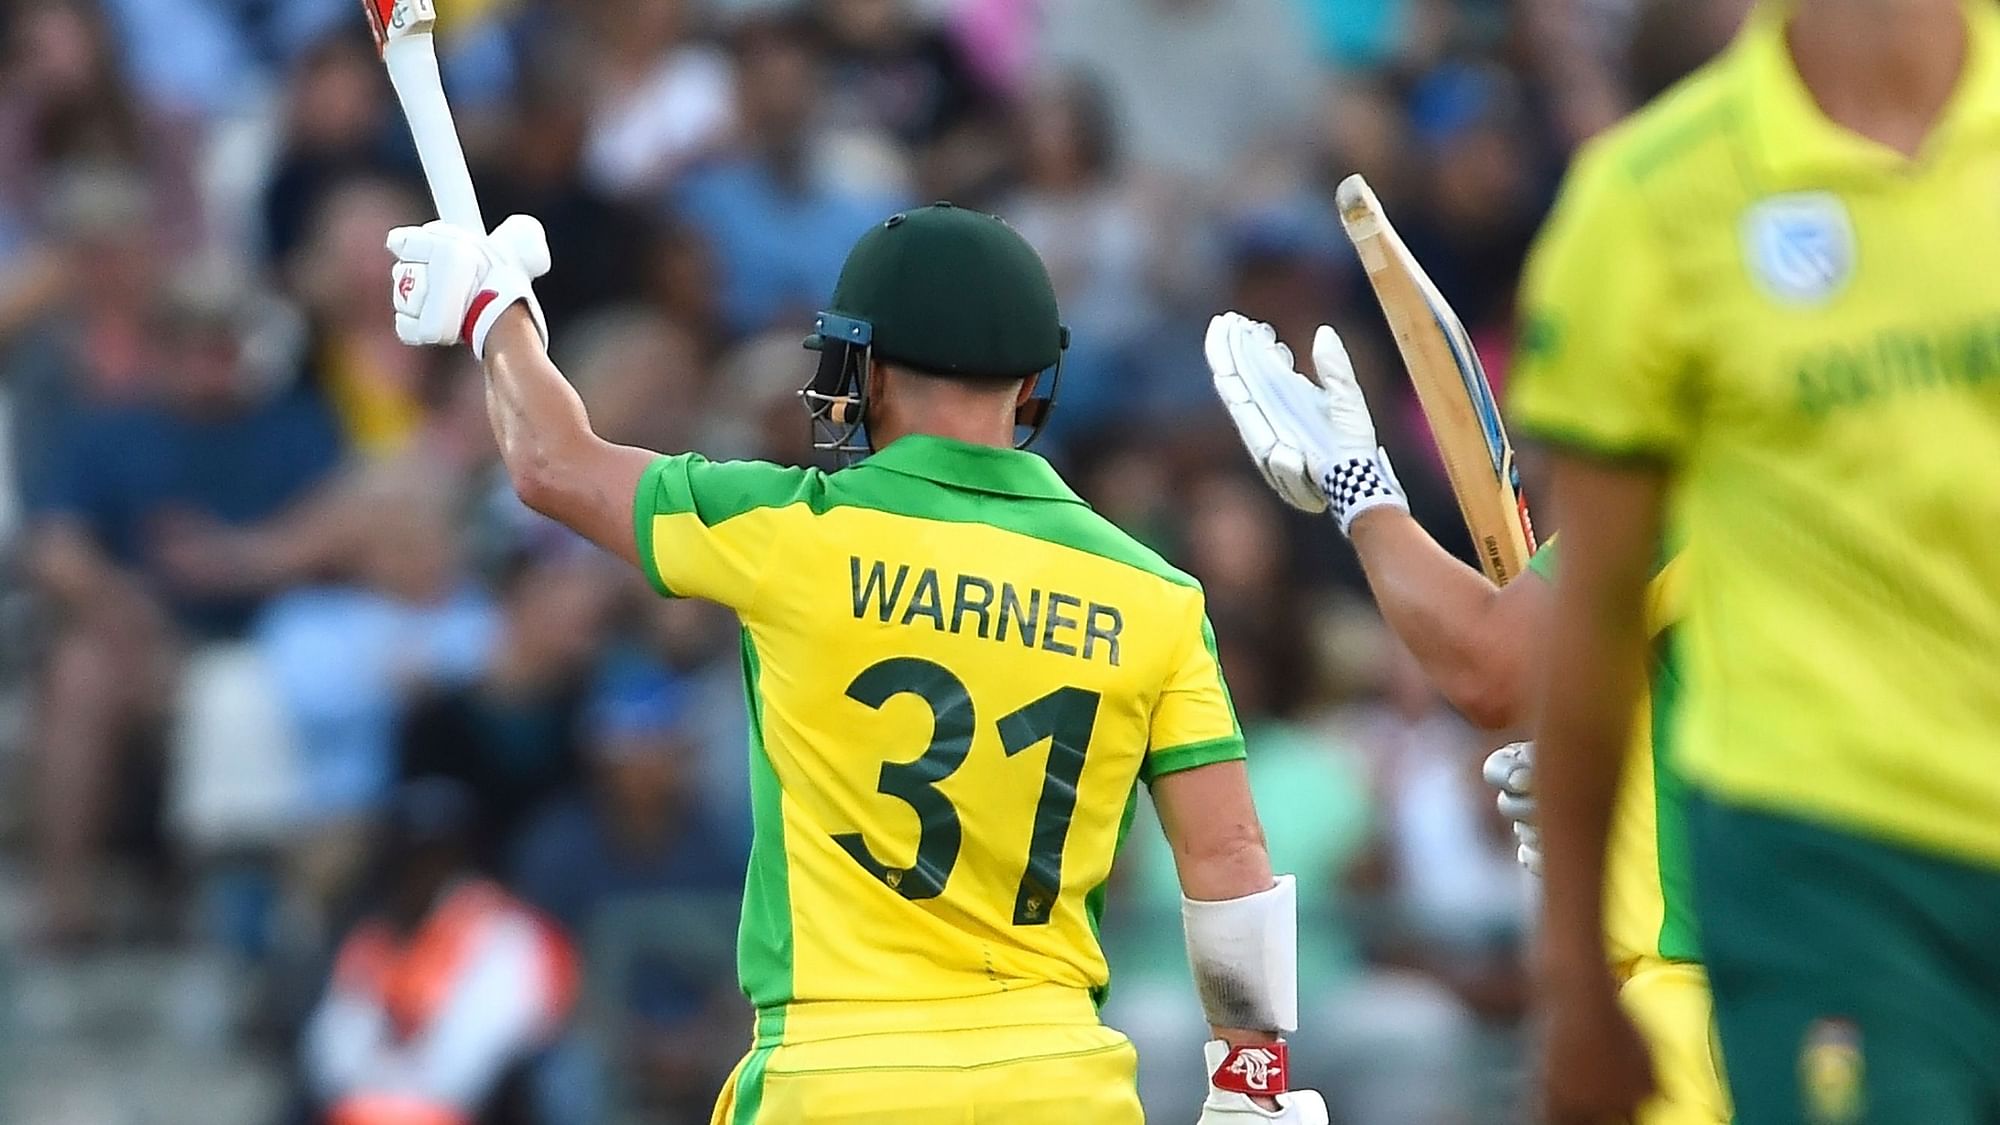 David Warner played a key role as Australia sealed the T20 series at the venue of the ball tampering scandal two years back.